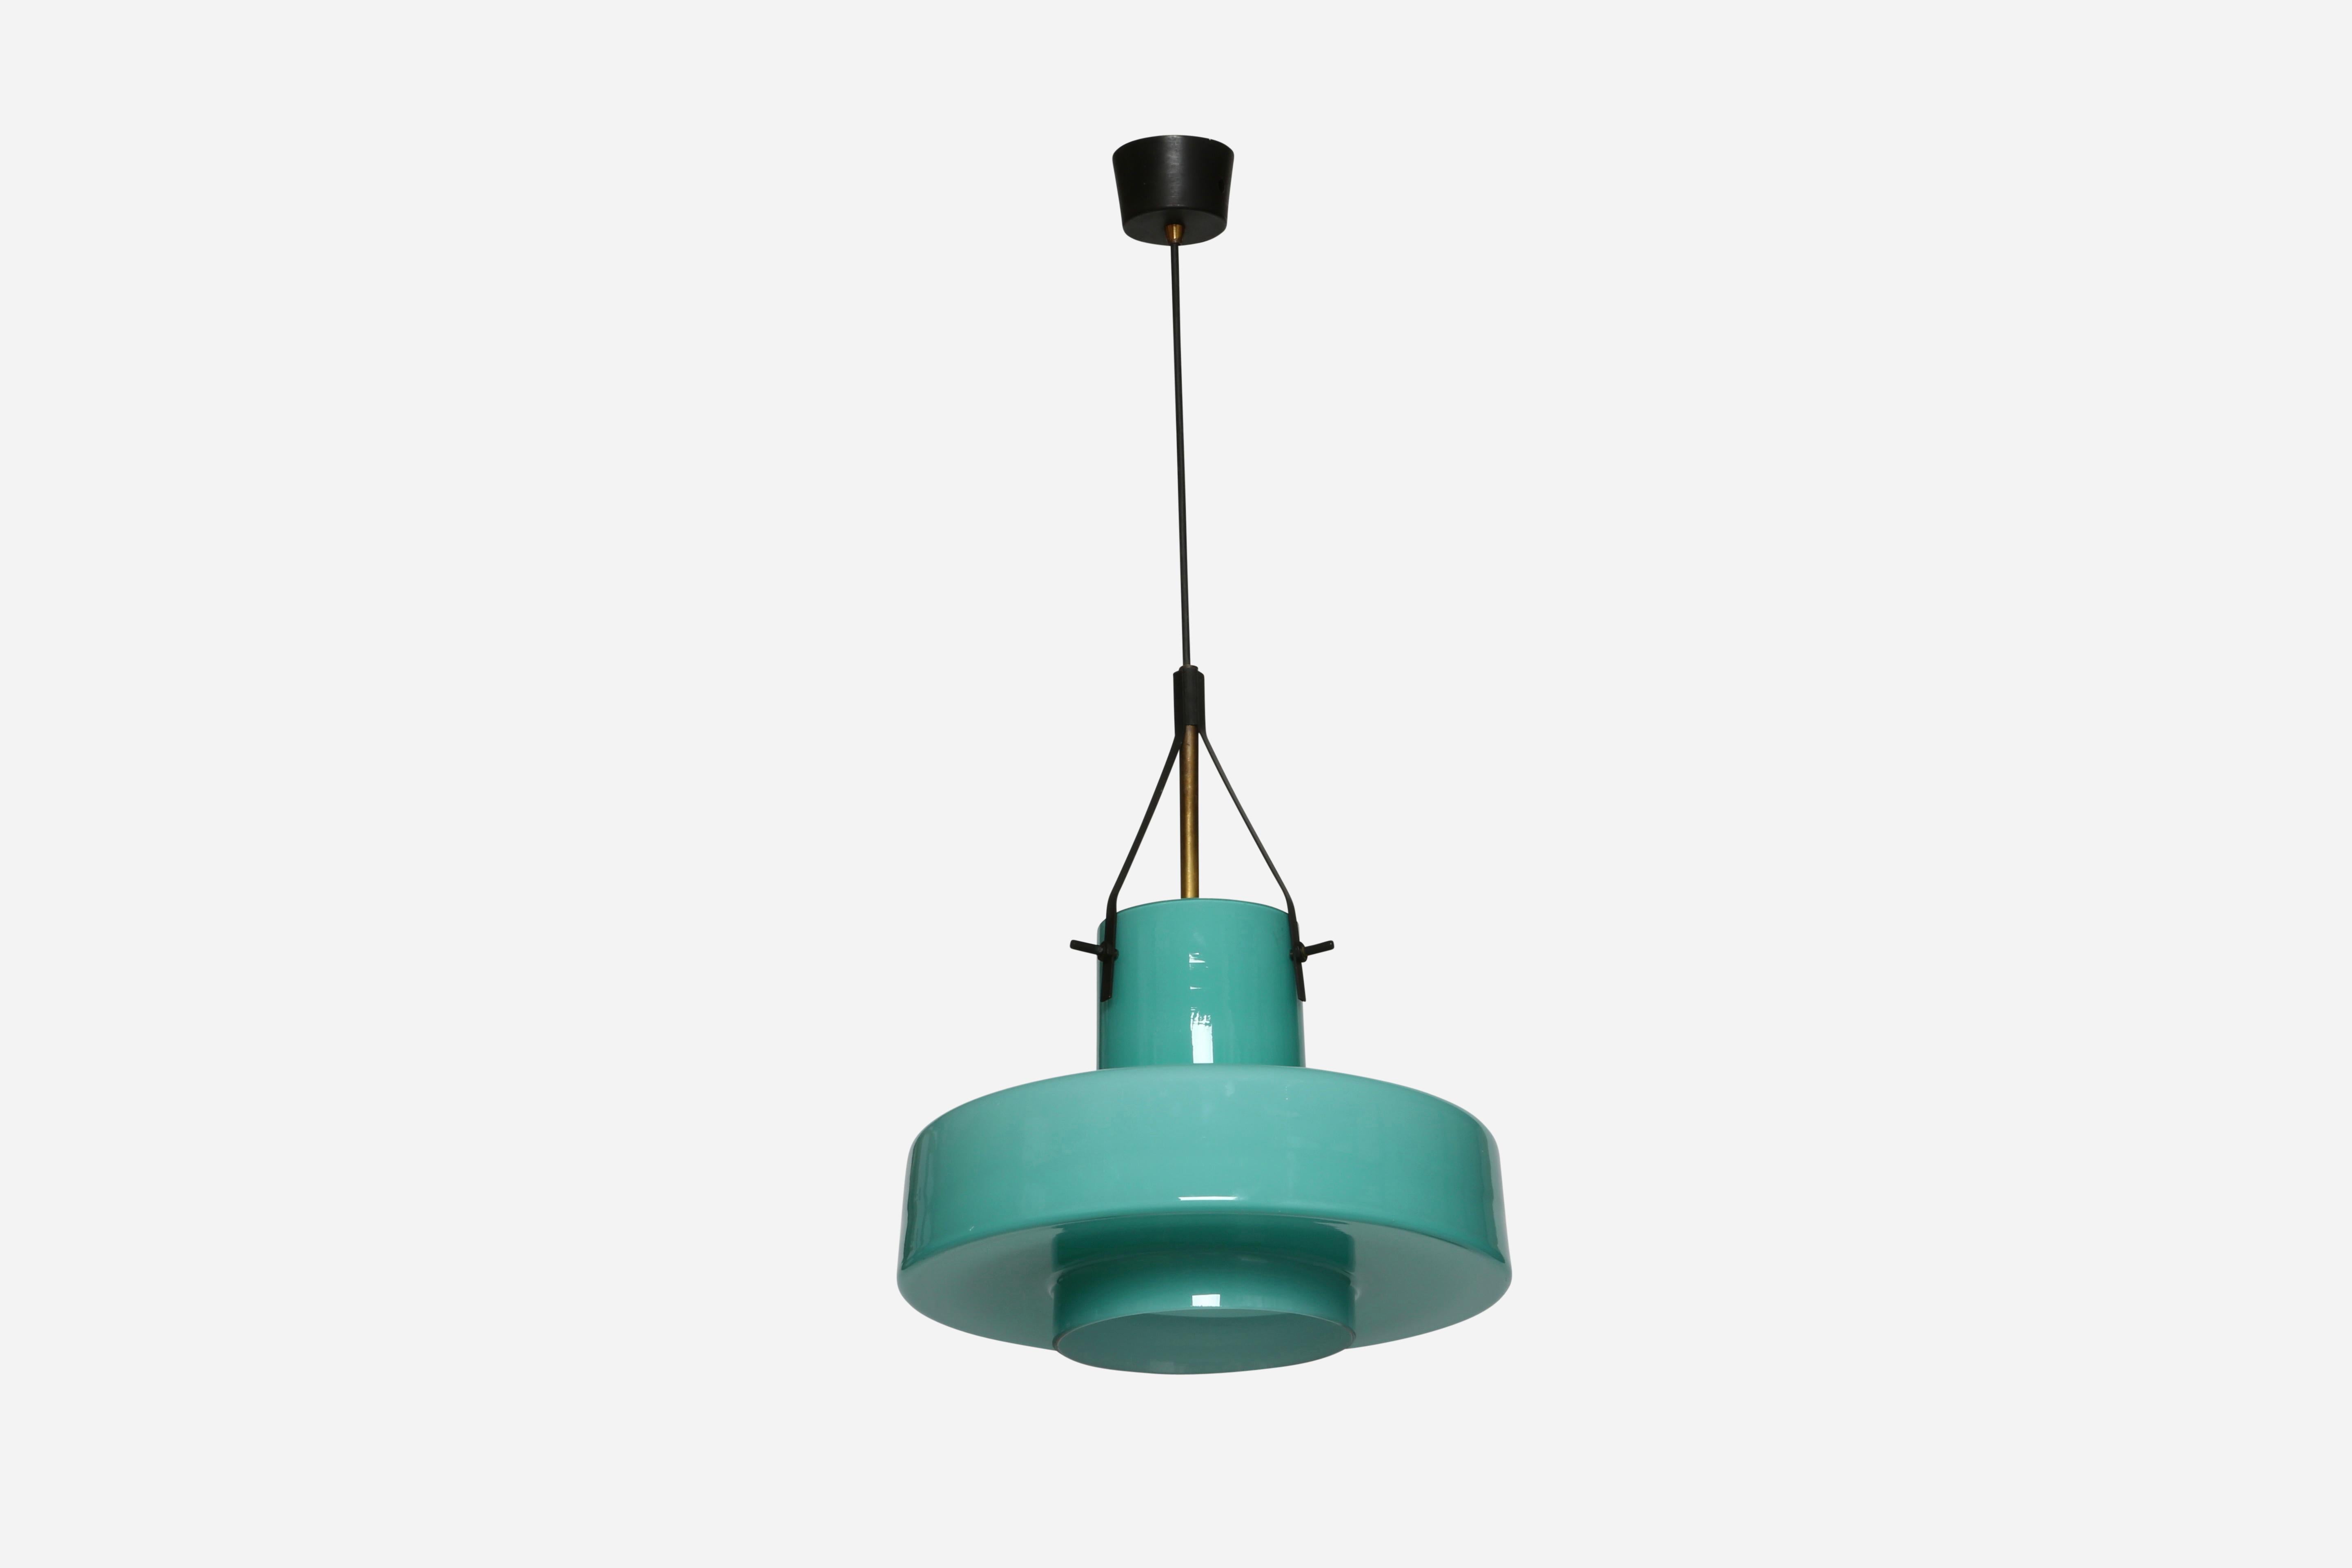 Stilnovo ceiling pendant
Designed and made in Italy, 1960s
Double layered glass, green on the outside, white on the inside.
Takes one medium base bulb.
Complimentary US rewiring upon request.
Overall drop is adjustable.
Height of the glass with the